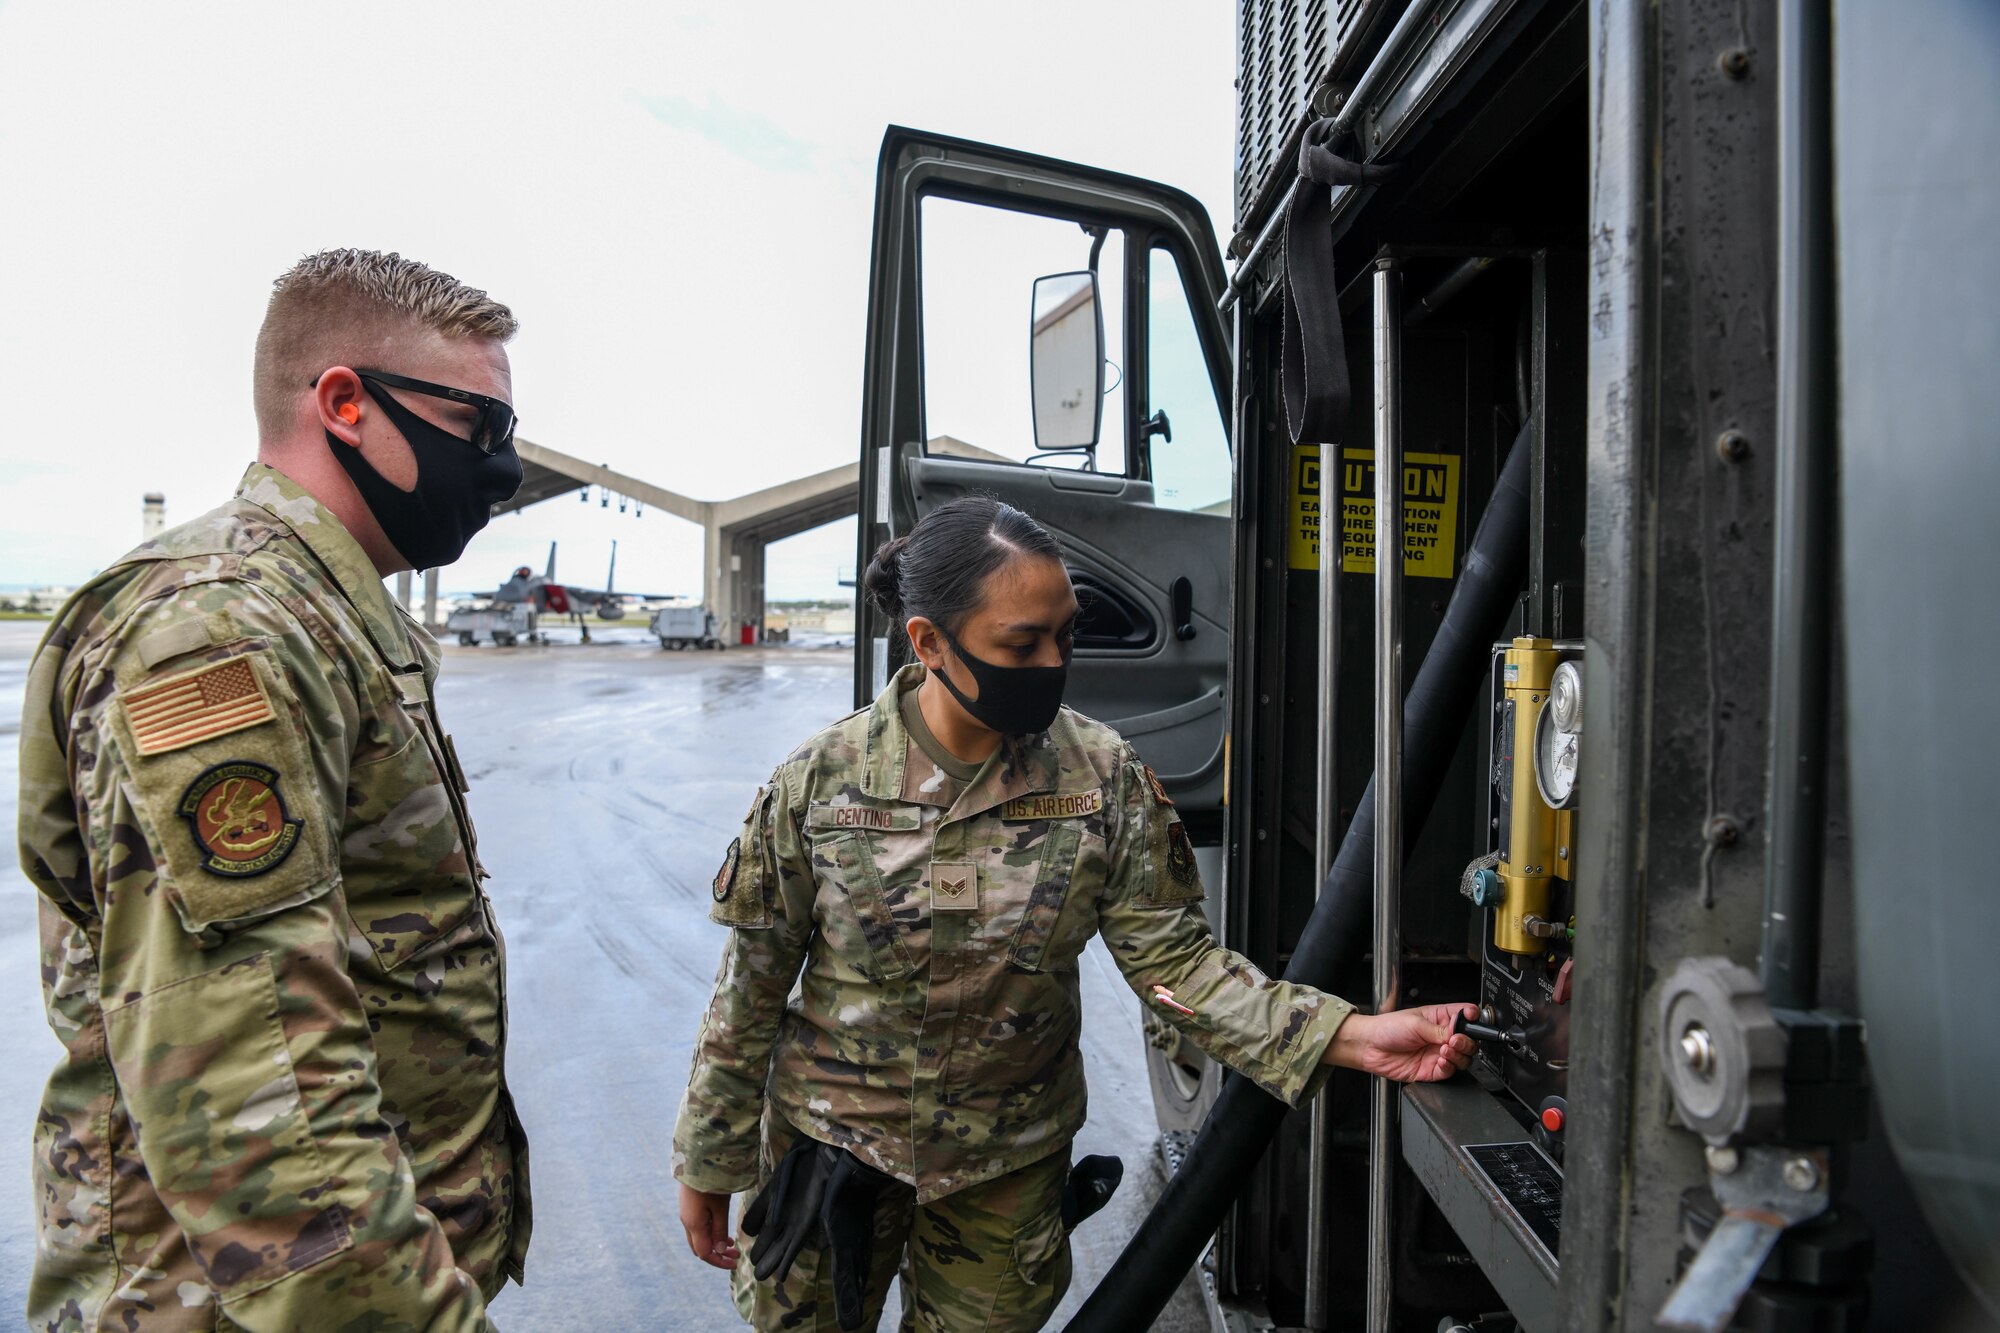 U.S. Air Force Tech Sgt. Chaz Wise, a quality assurance evaluator from the 18th Logistic Readiness Squadron, instructs Senior Airman Jamaila Centino, a member from the 18th Wing Security Forces Squadron, on refueling procedures during a Multi-Capable Airmen course exercise on Kadena Air Base, Japan, Feb. 26, 2021. The MCA course is conducted over five days, and includes three tiers of training, each more in-depth than the last.